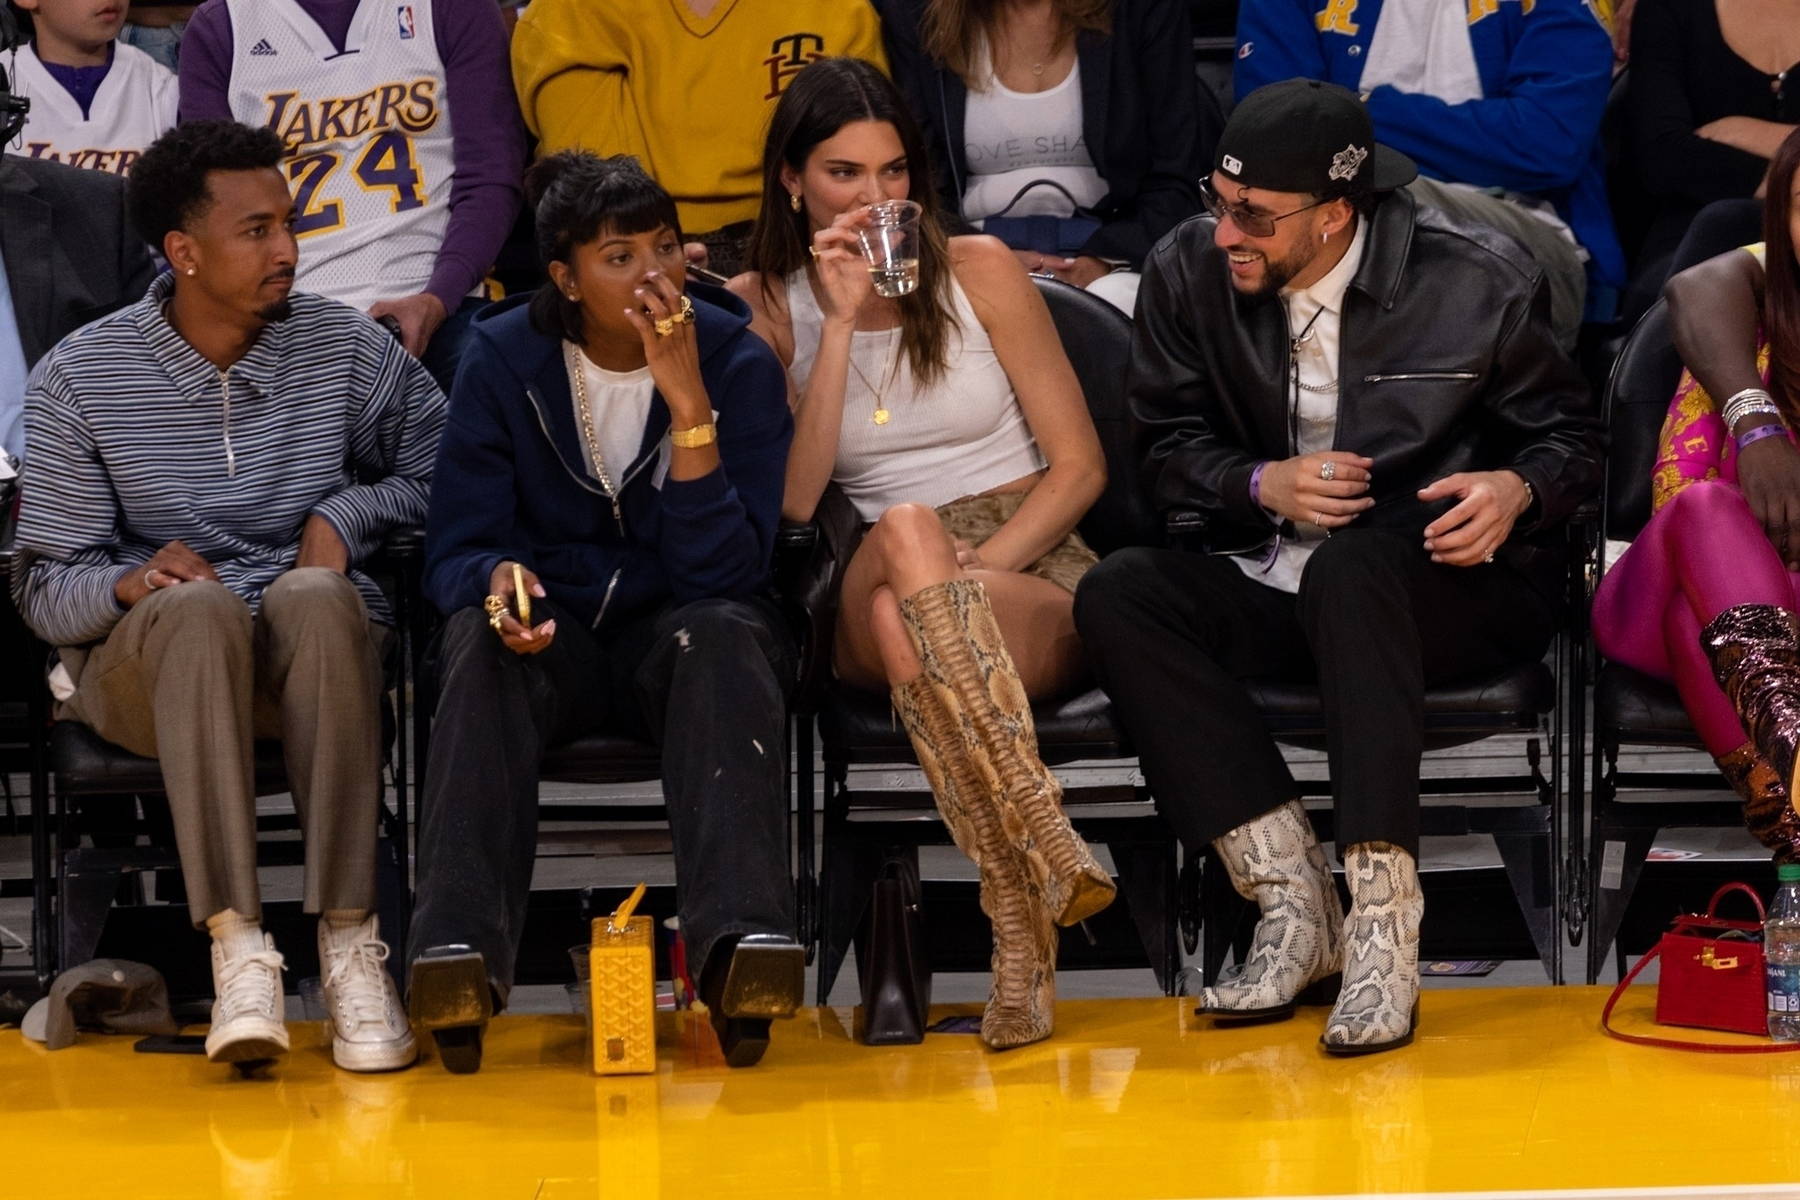 Kendall Jenner is all smiles while seen courtside with new